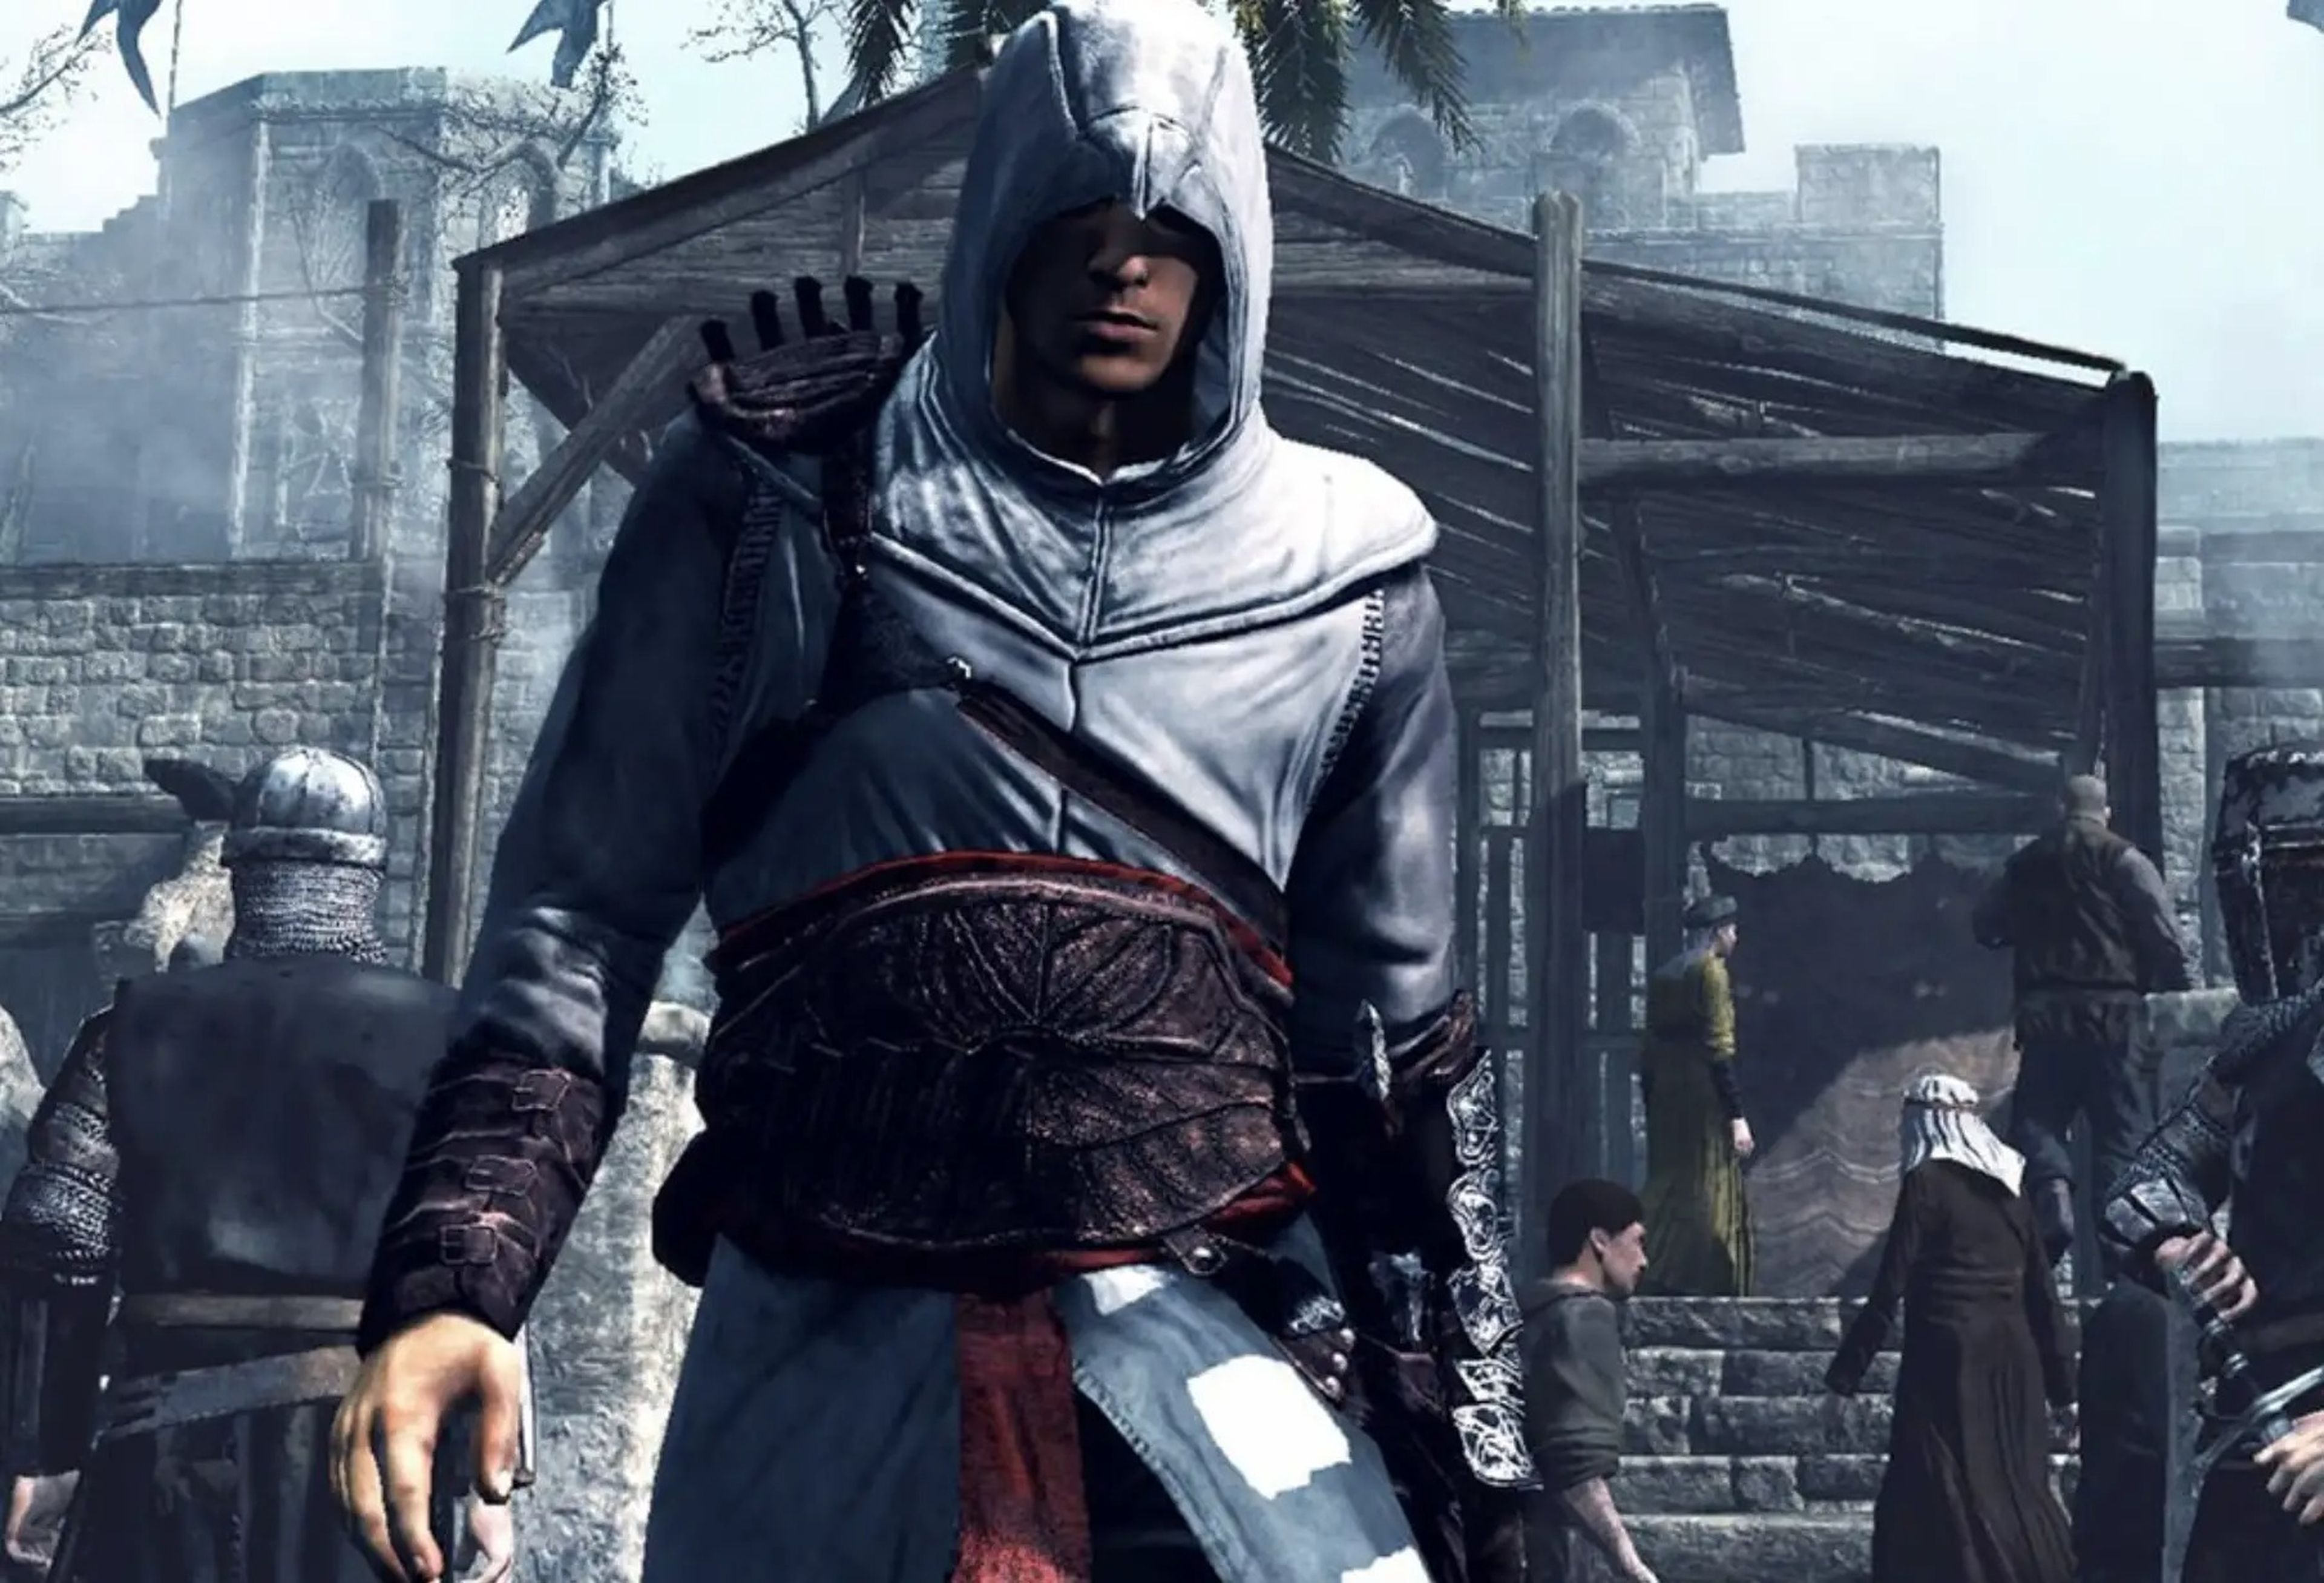 'Assassin's Creed'.